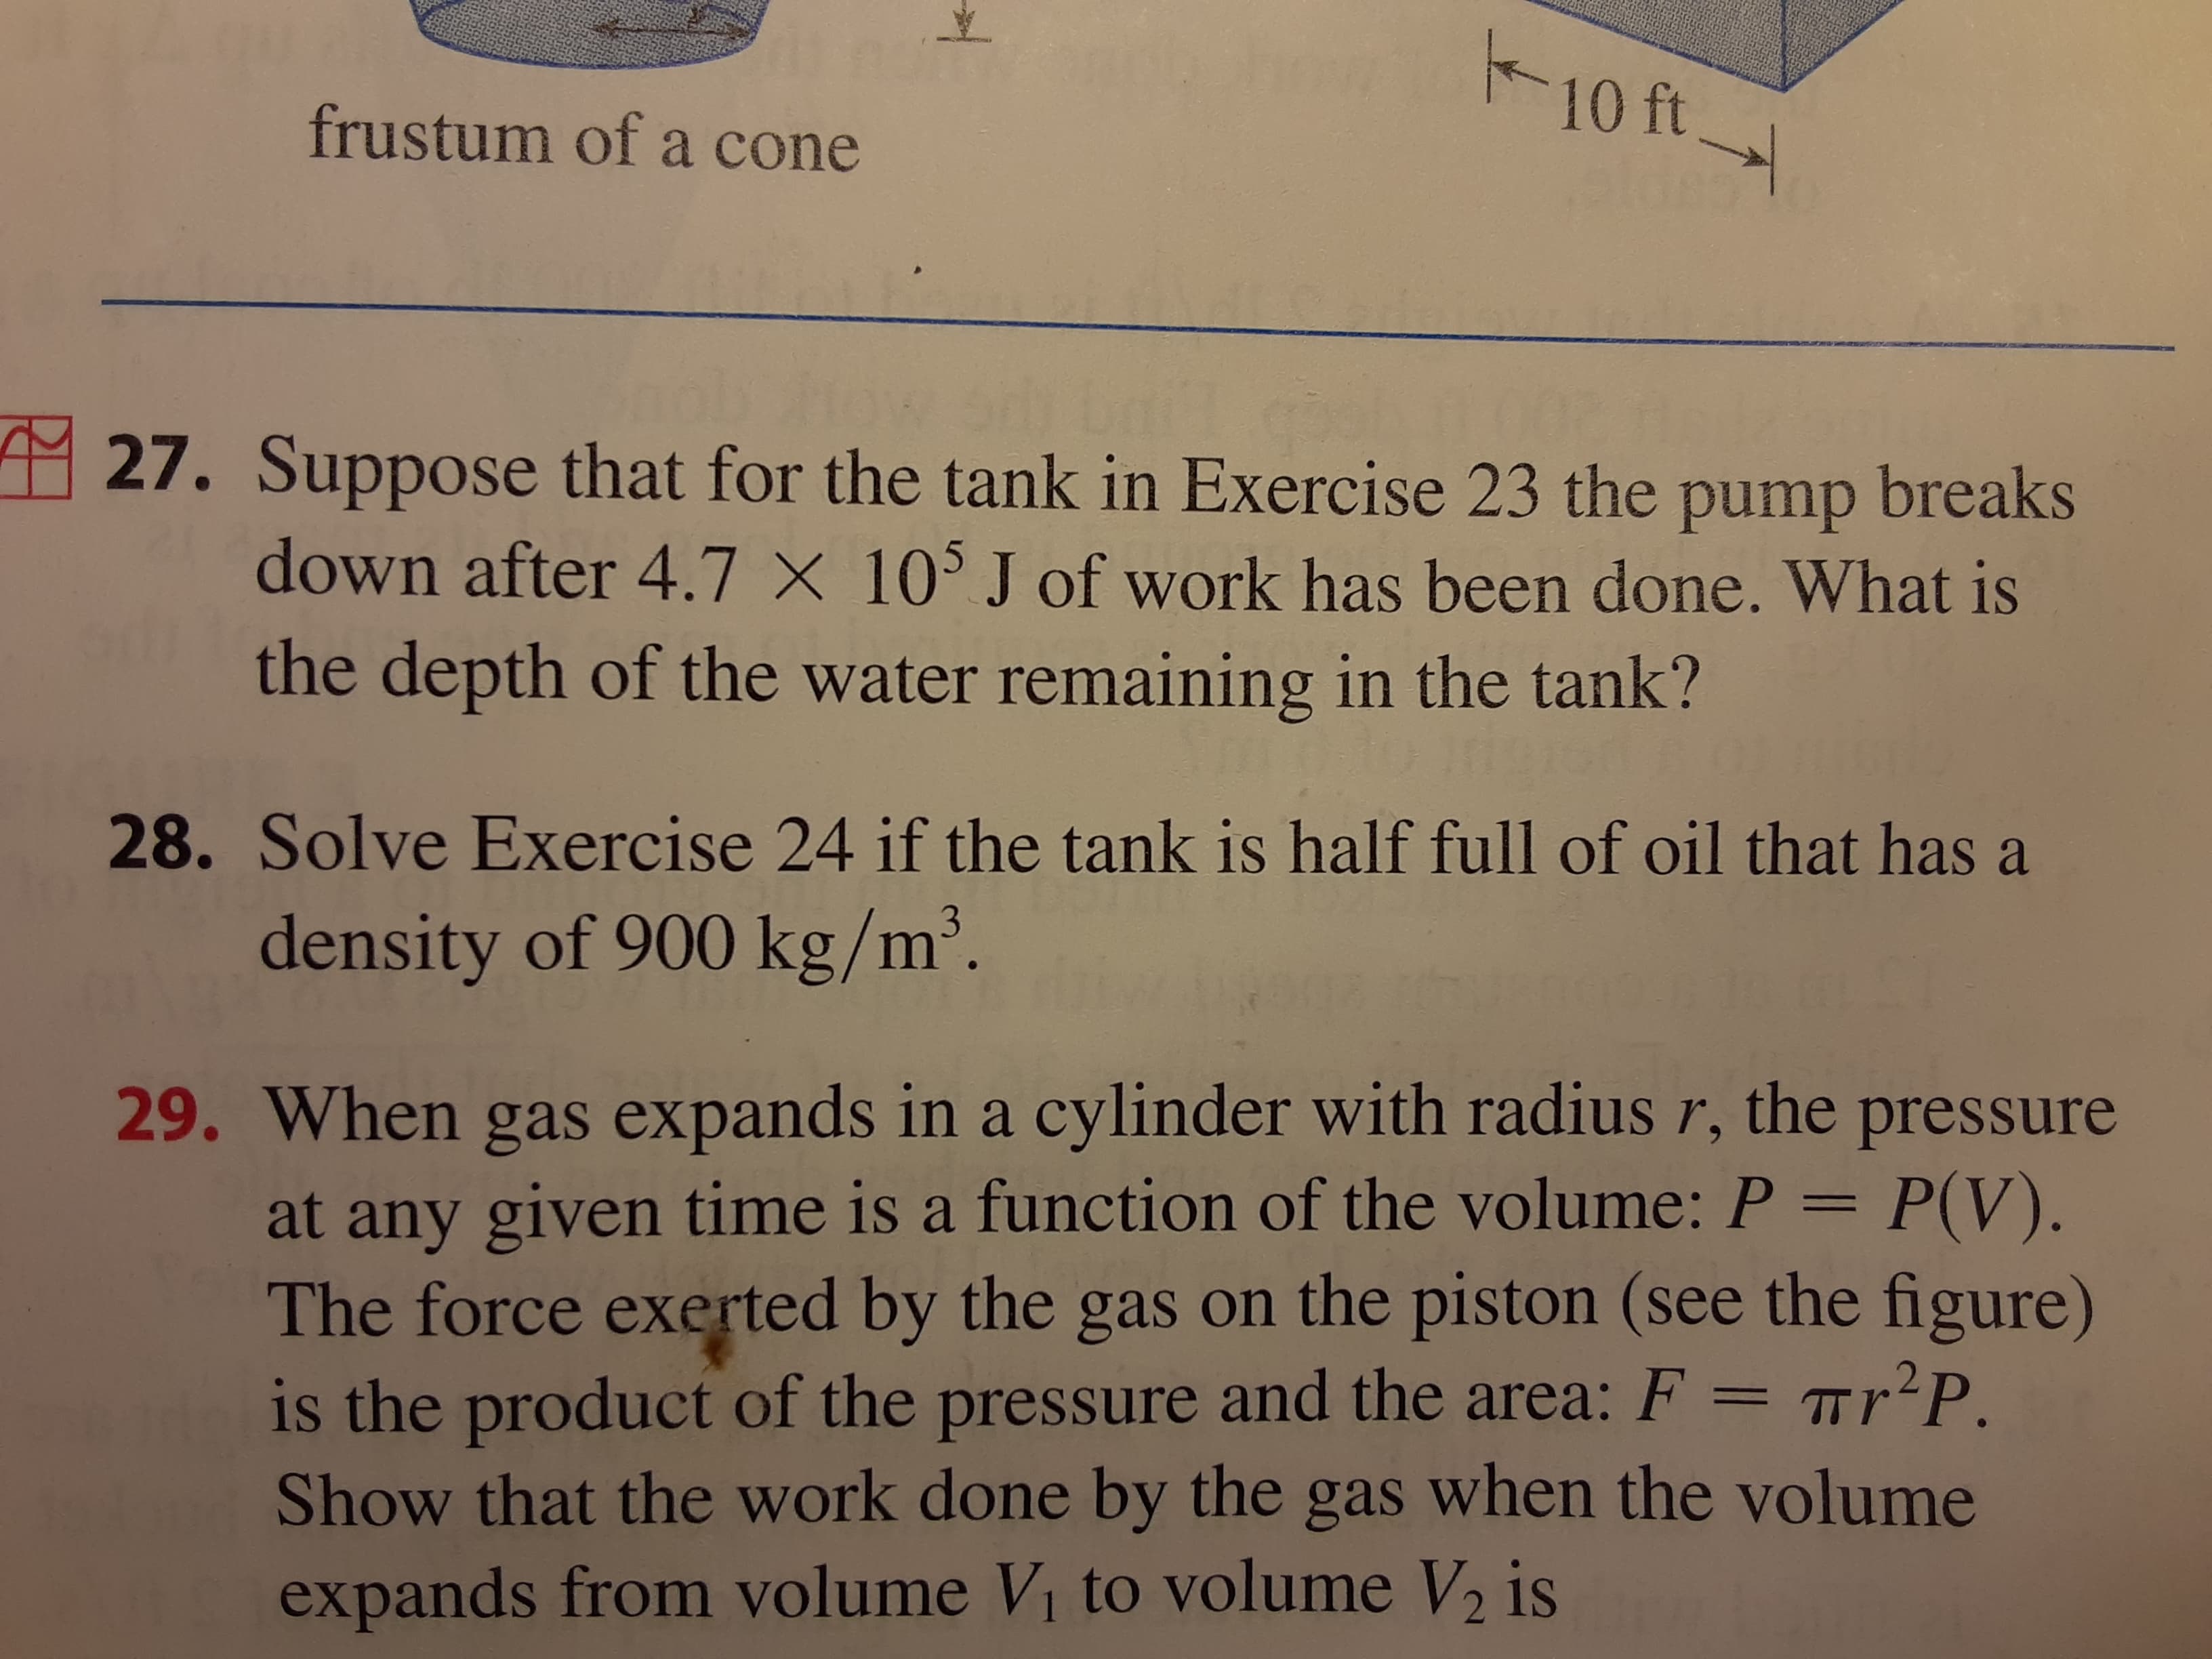 Solve Exercise 24 if the tank is half full of oil that has a
density of 900 kg/m³.
